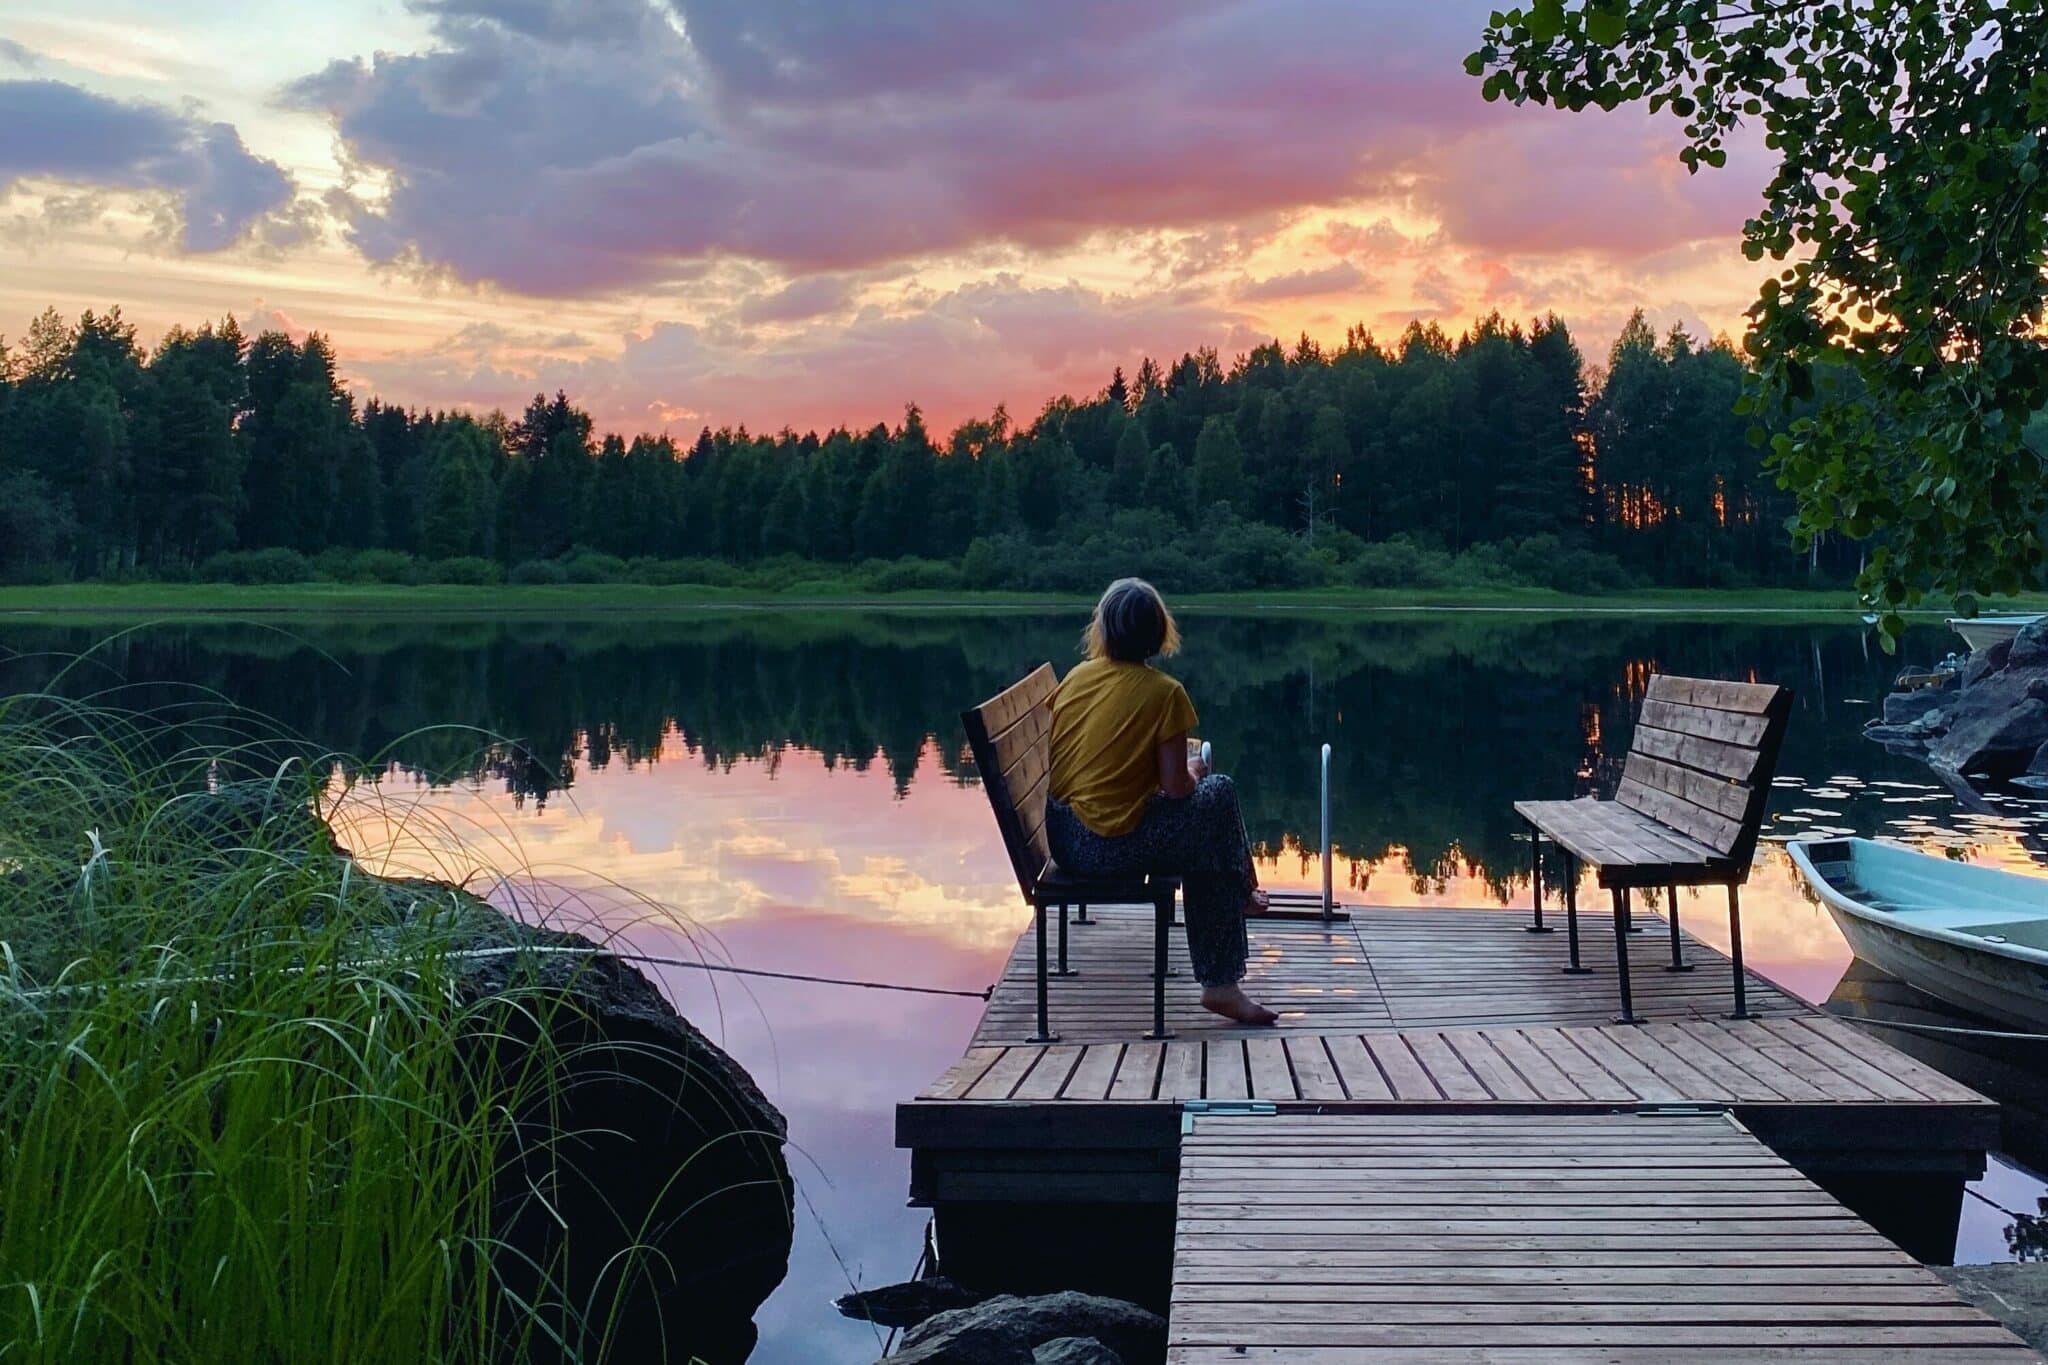 The picture shows a woman, she is sitting on a bench on a jetty. In the background you can see a lake and above it a pink sunset.